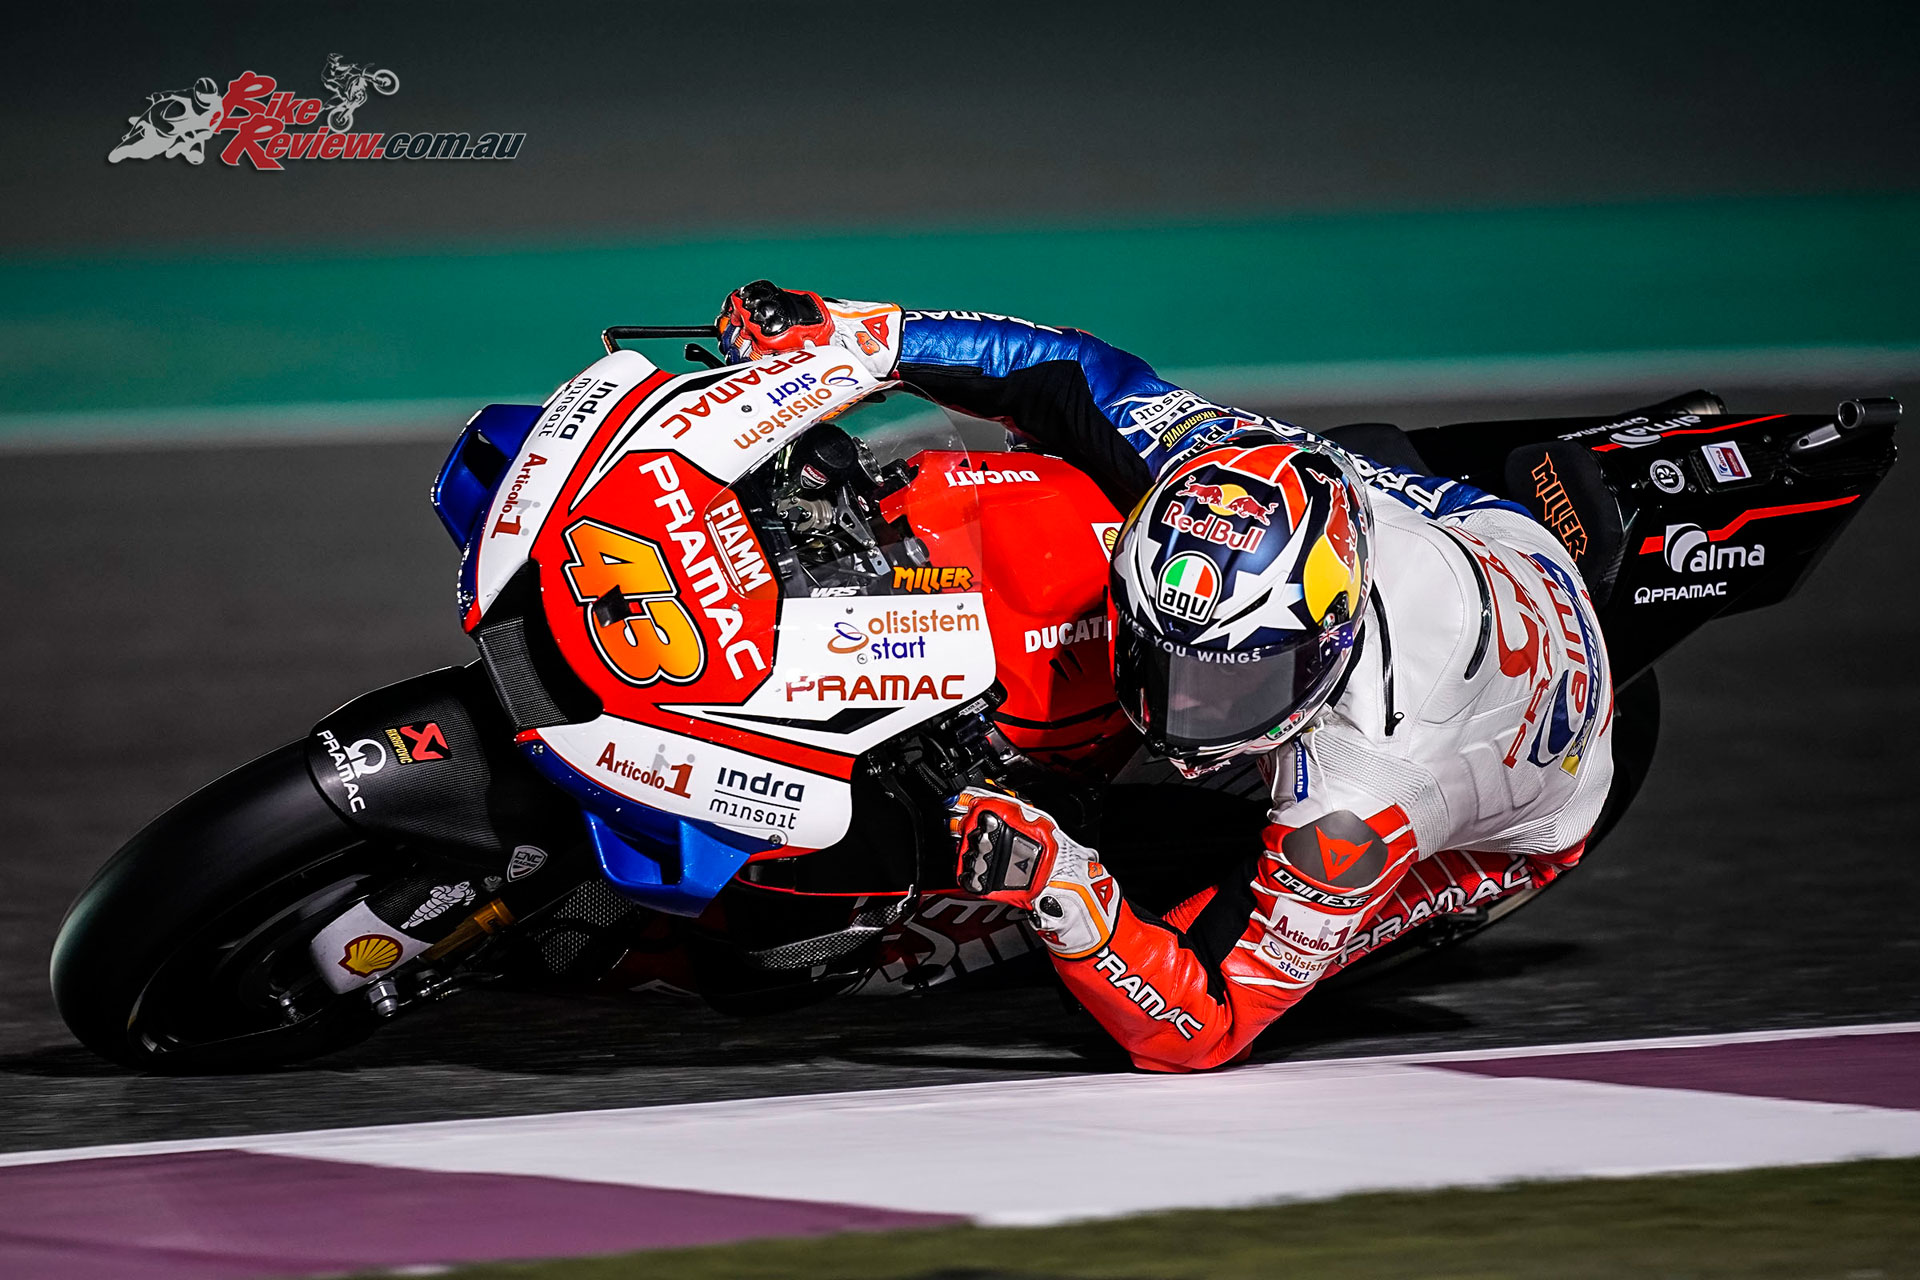 Andrea Dovizioso claims Qatar victory - Jack Miller DNF - Bike Review1920 x 1280